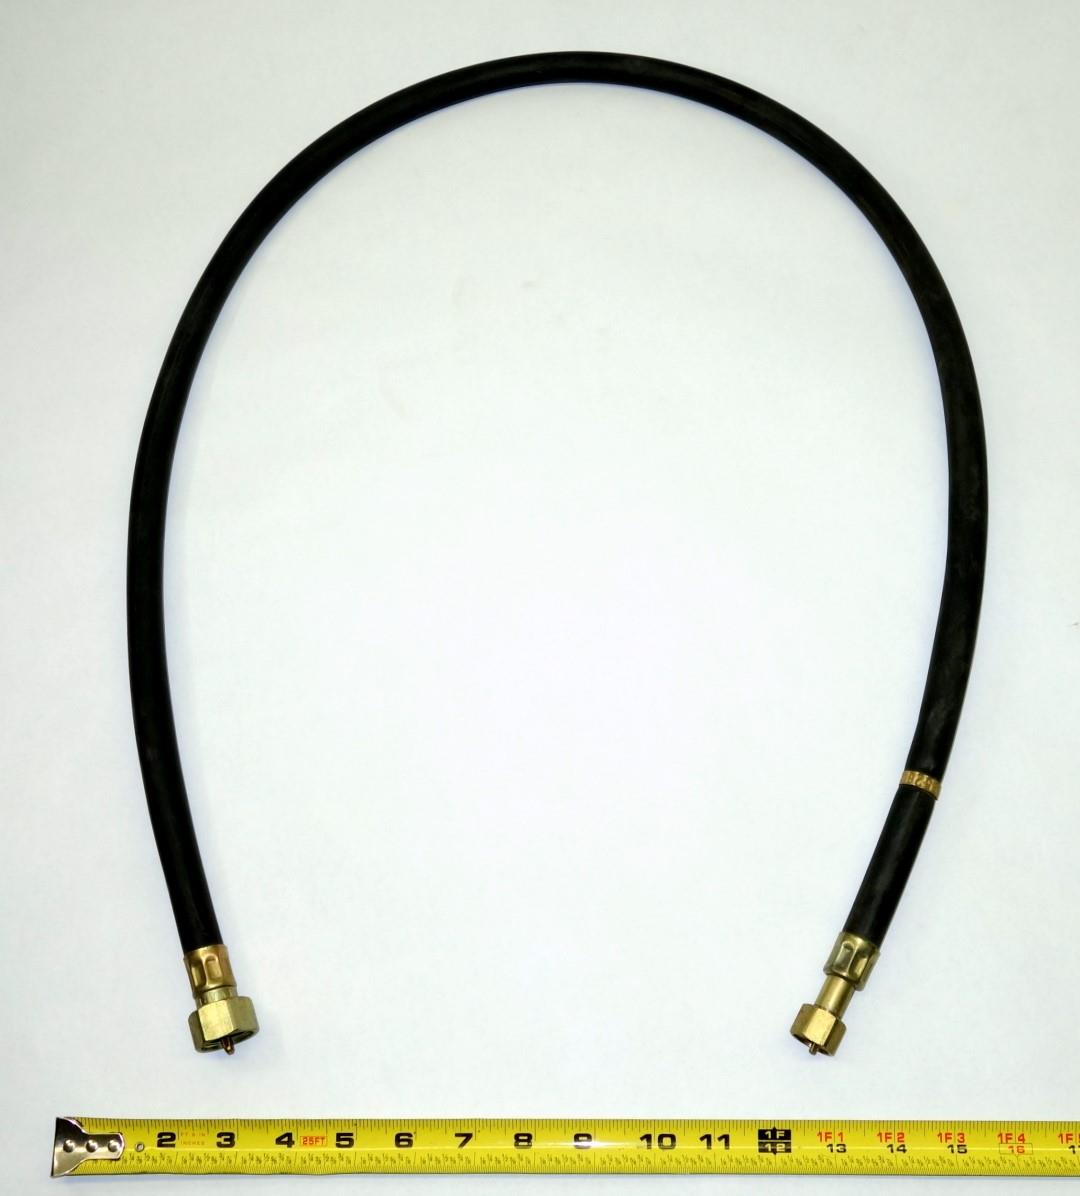 9M-834 | 6680-00-795-2641 Tachometer Cable for M939 and M939A1 Series Trucks NOS (2).JPG